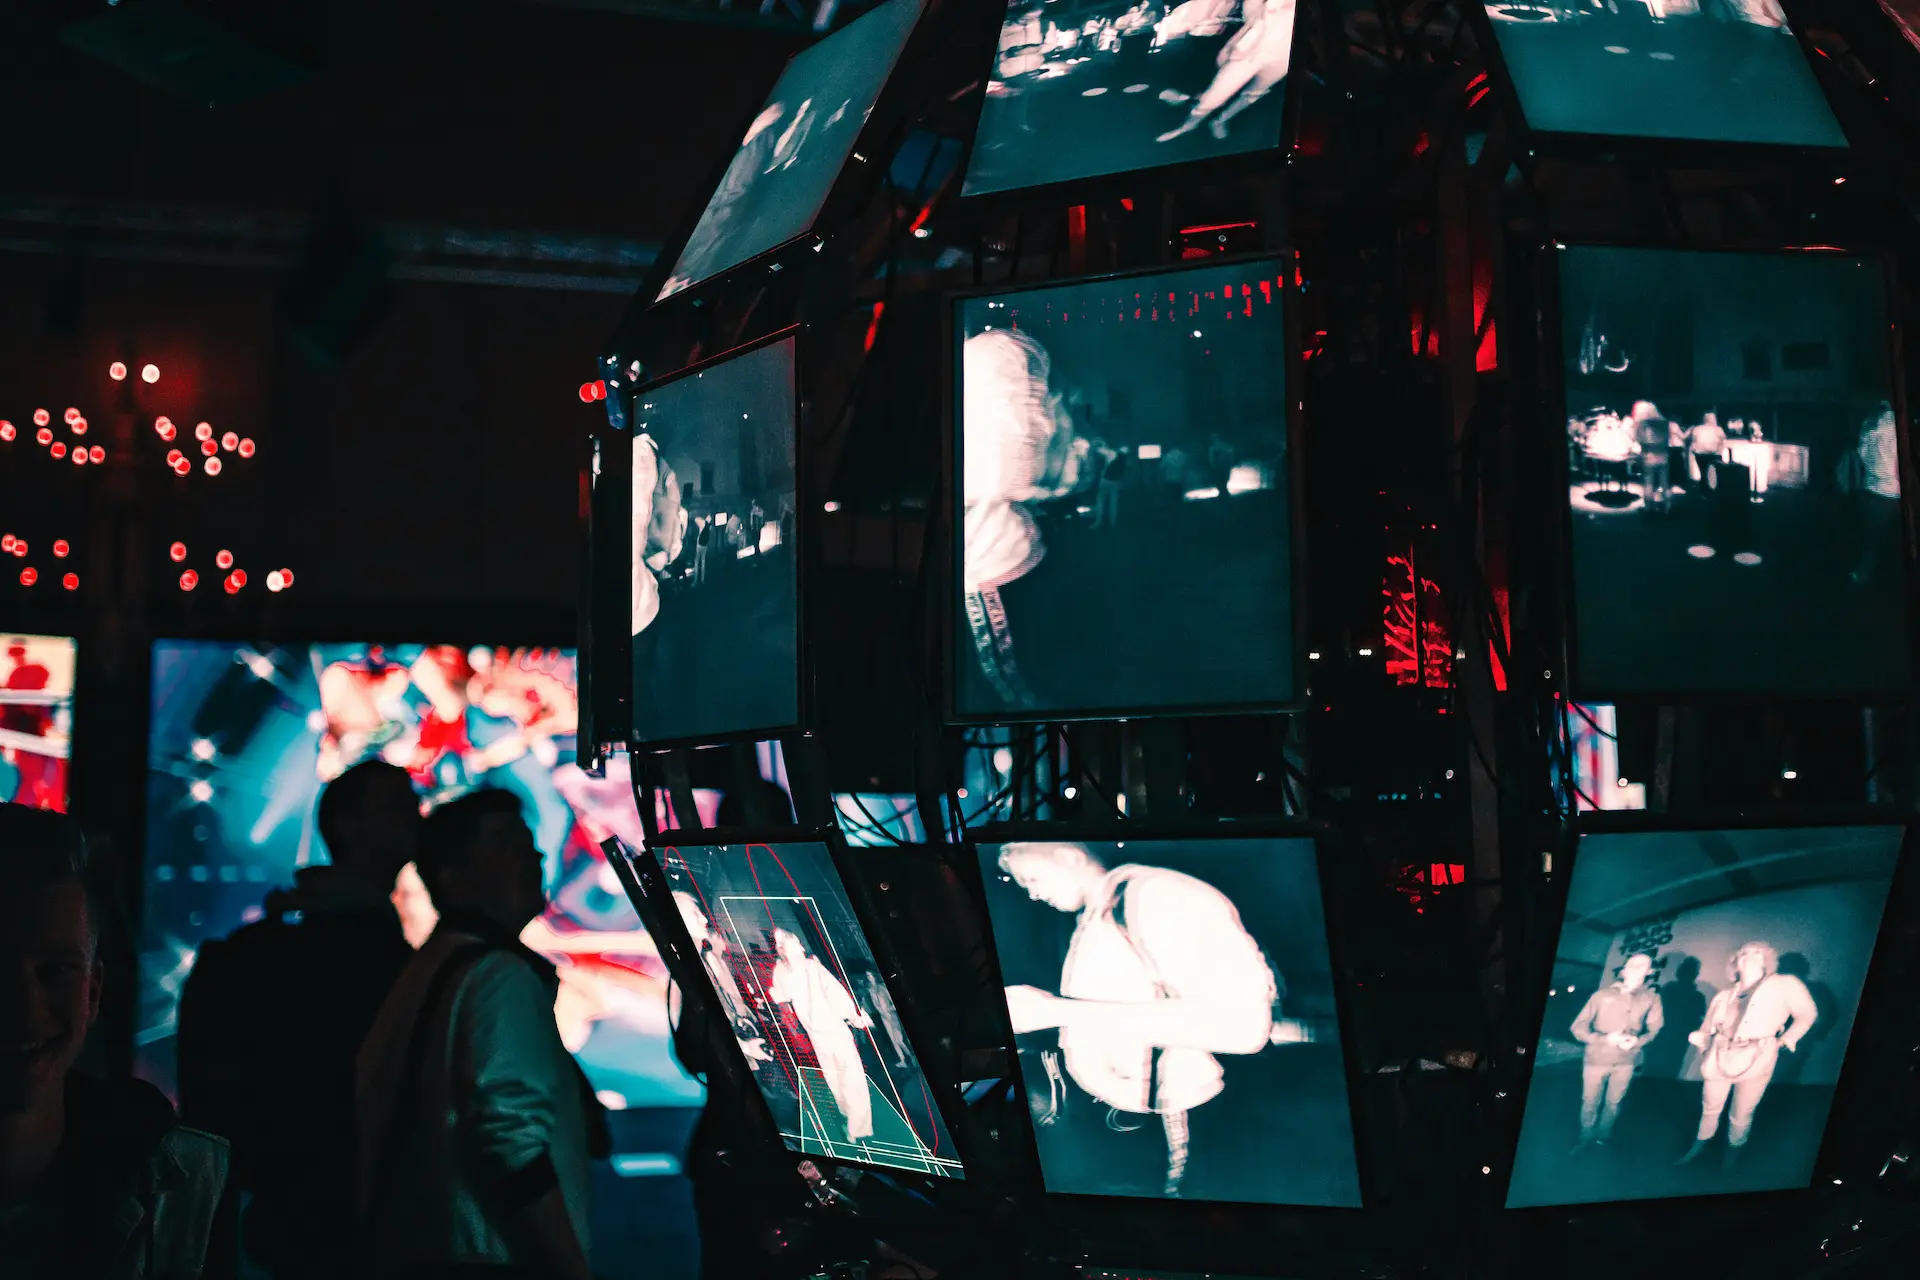 A night photo of a sphere made up of rectangular monitors with screens and silhouettes of people in the background.